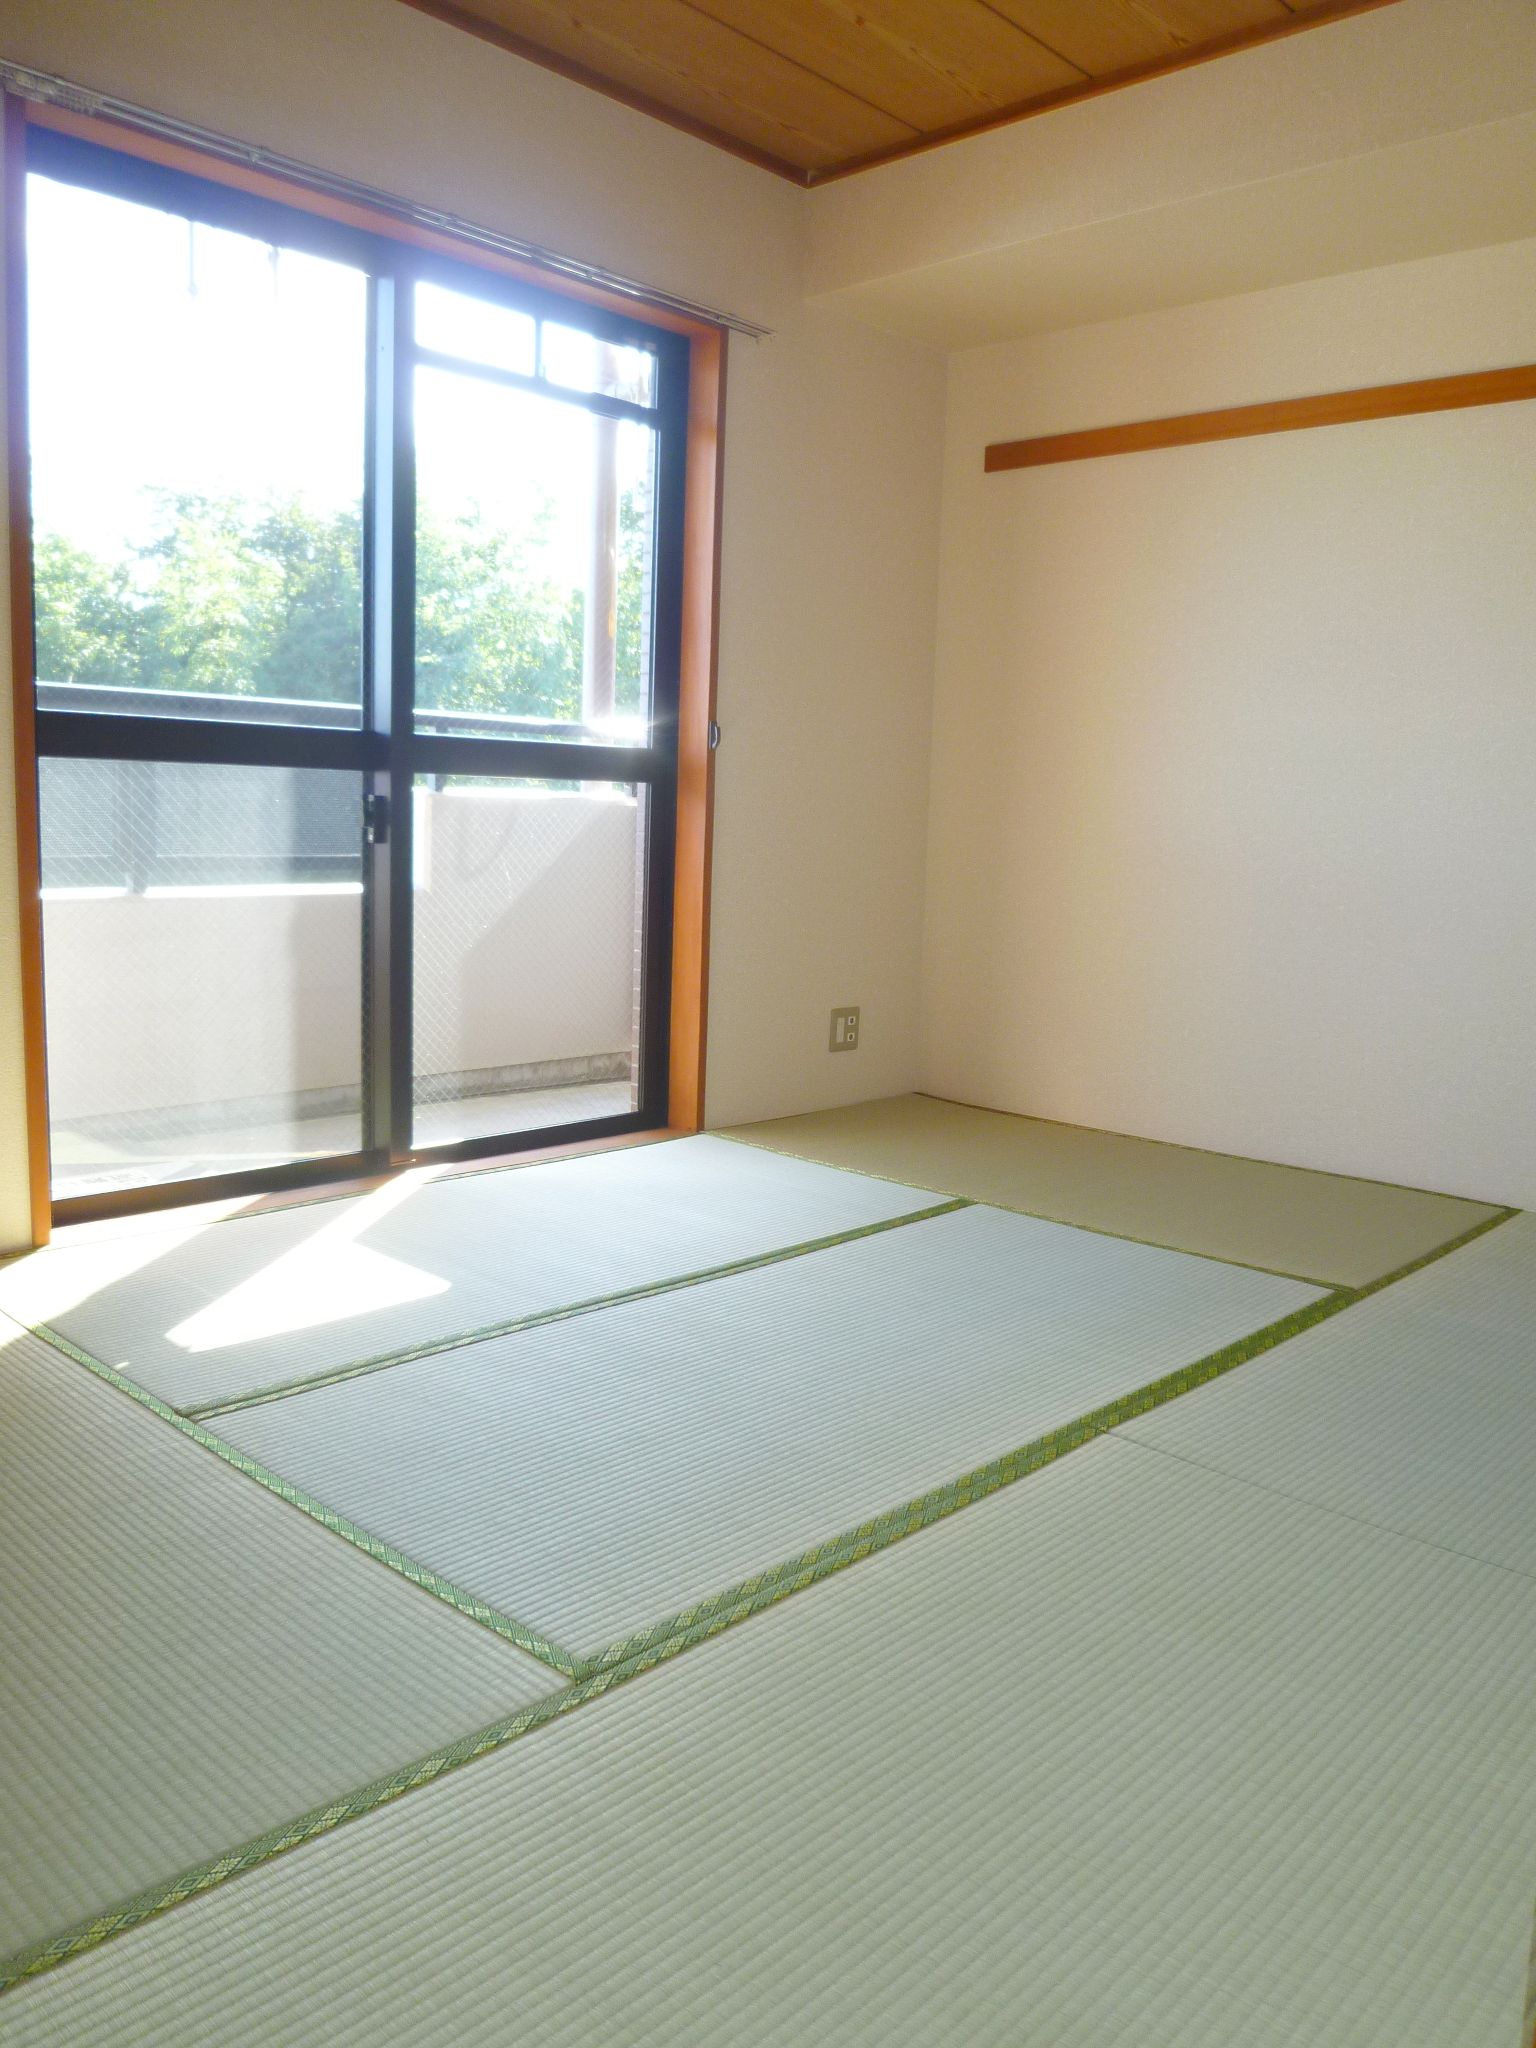 Living and room. Comfortable restful tatami rooms